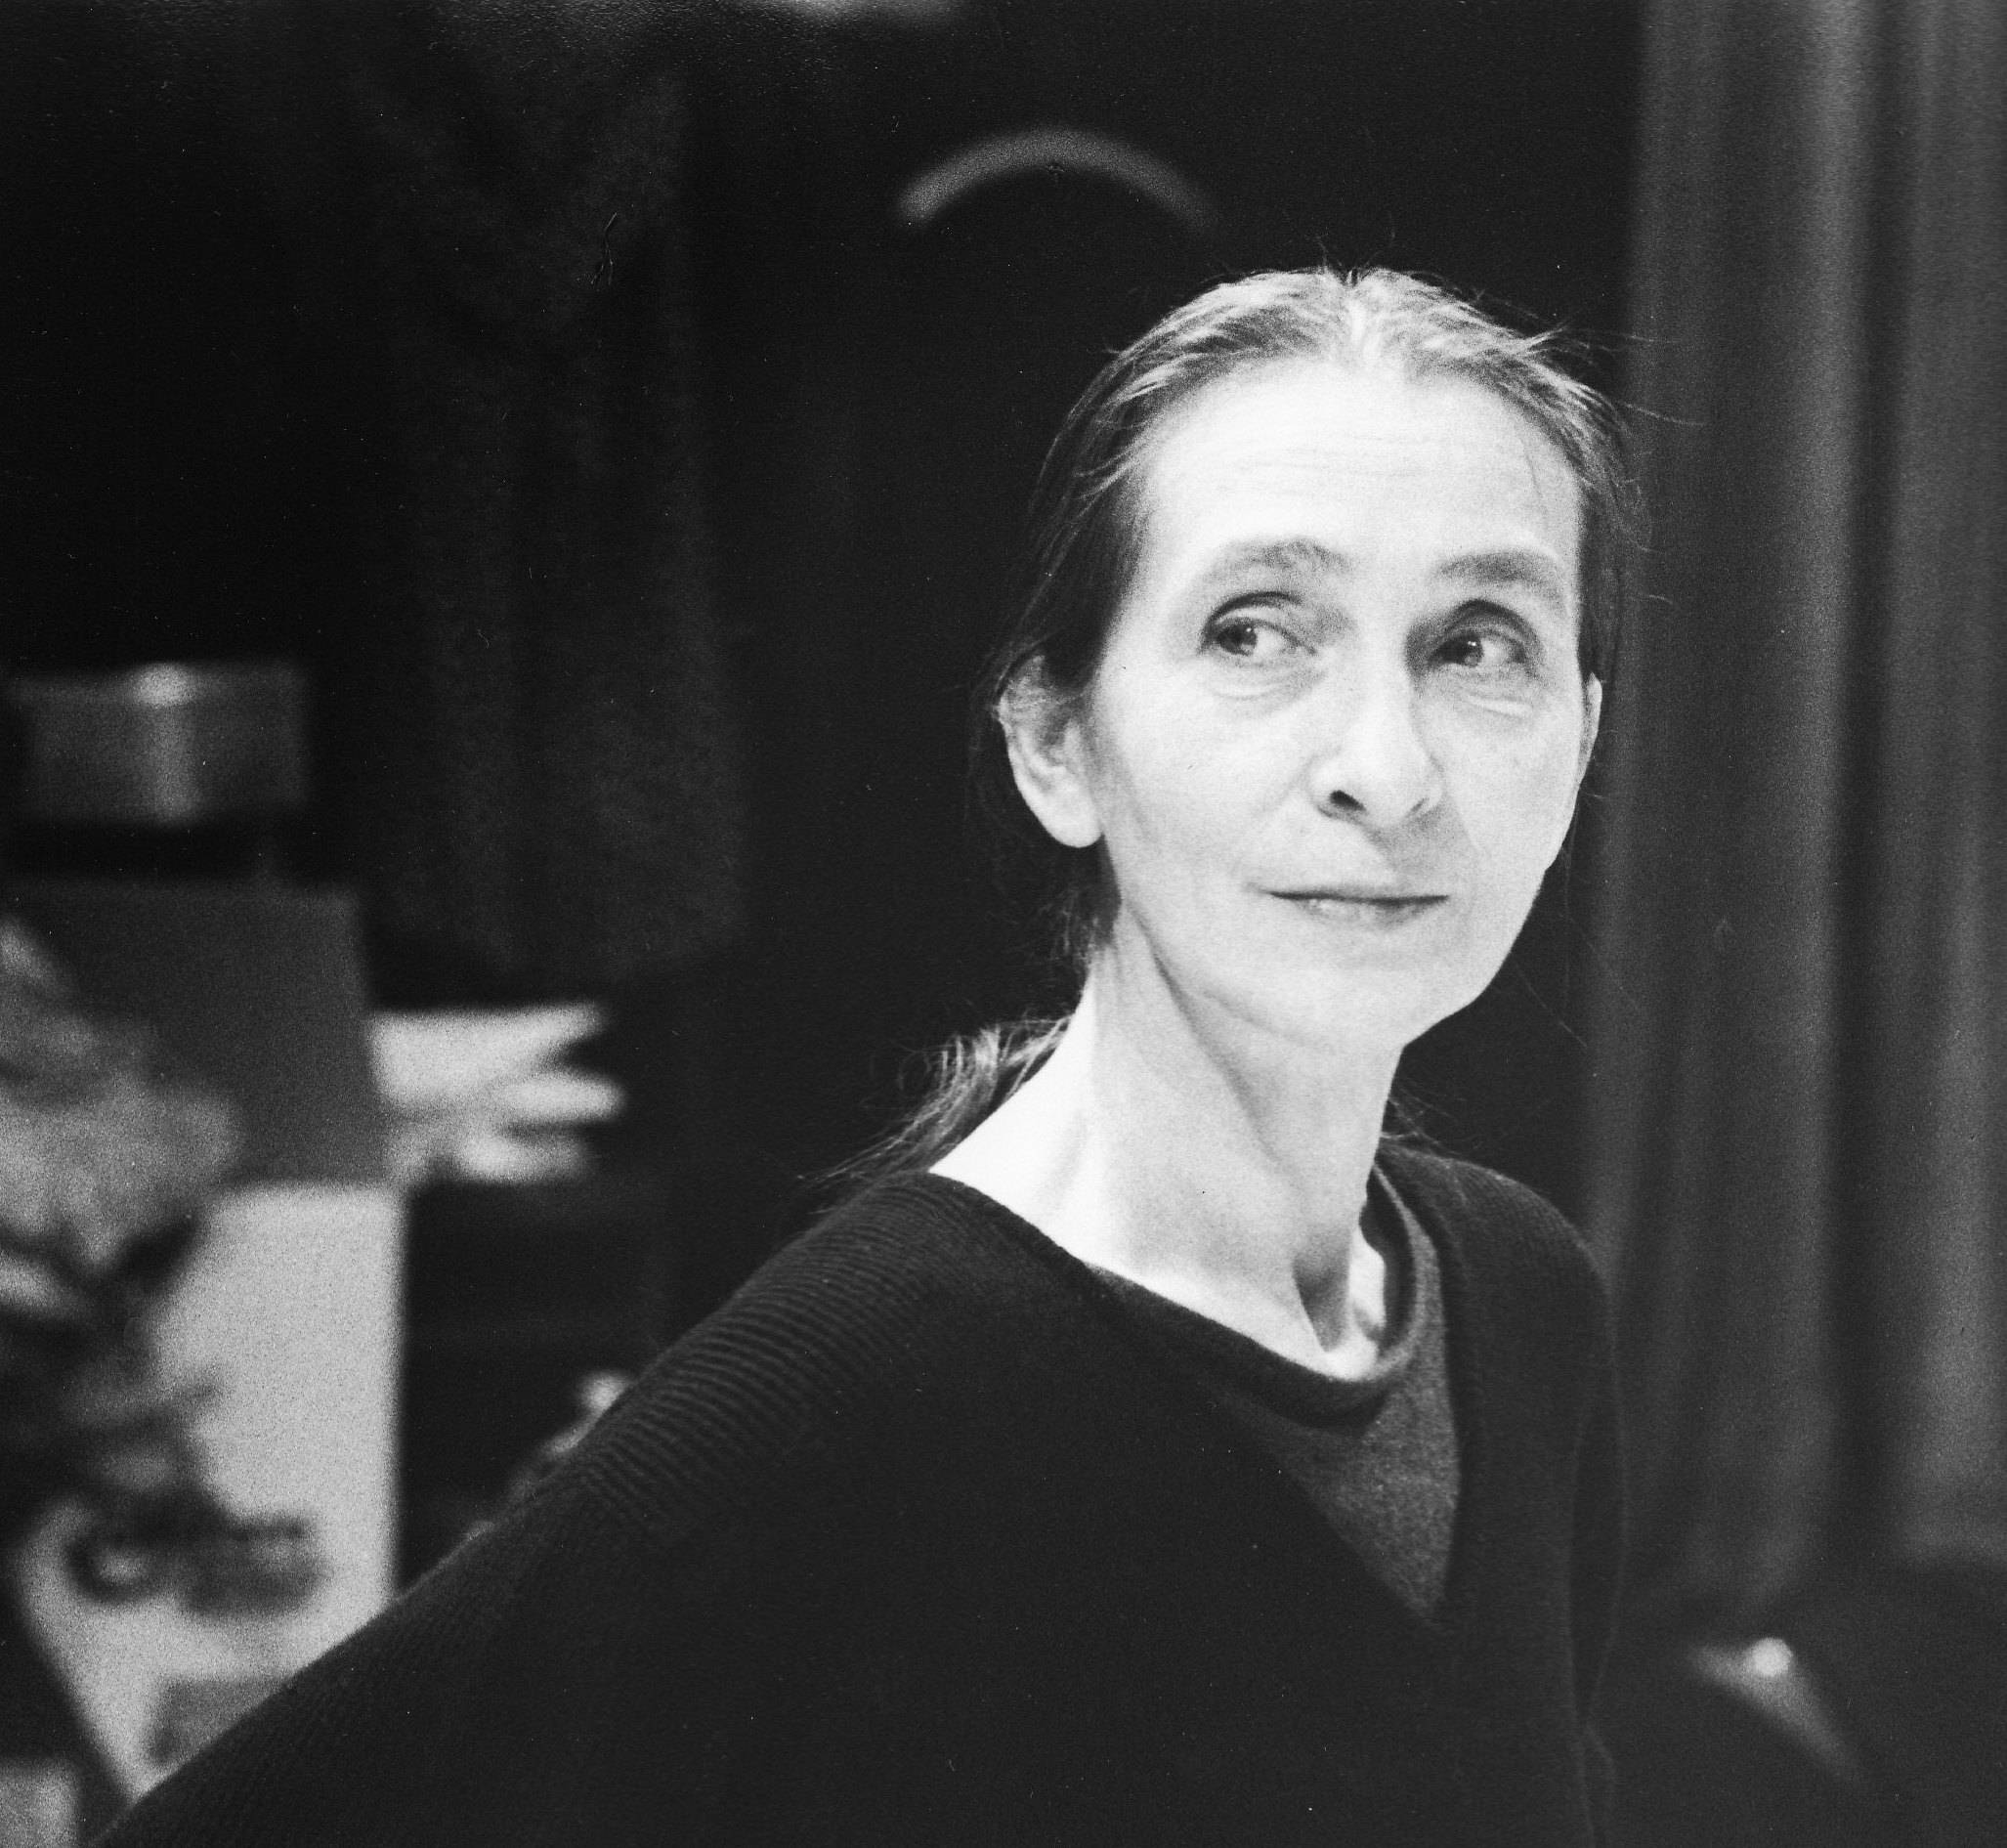 PINA BAUSCH - PHOTO BY WILFRIED KRUGER